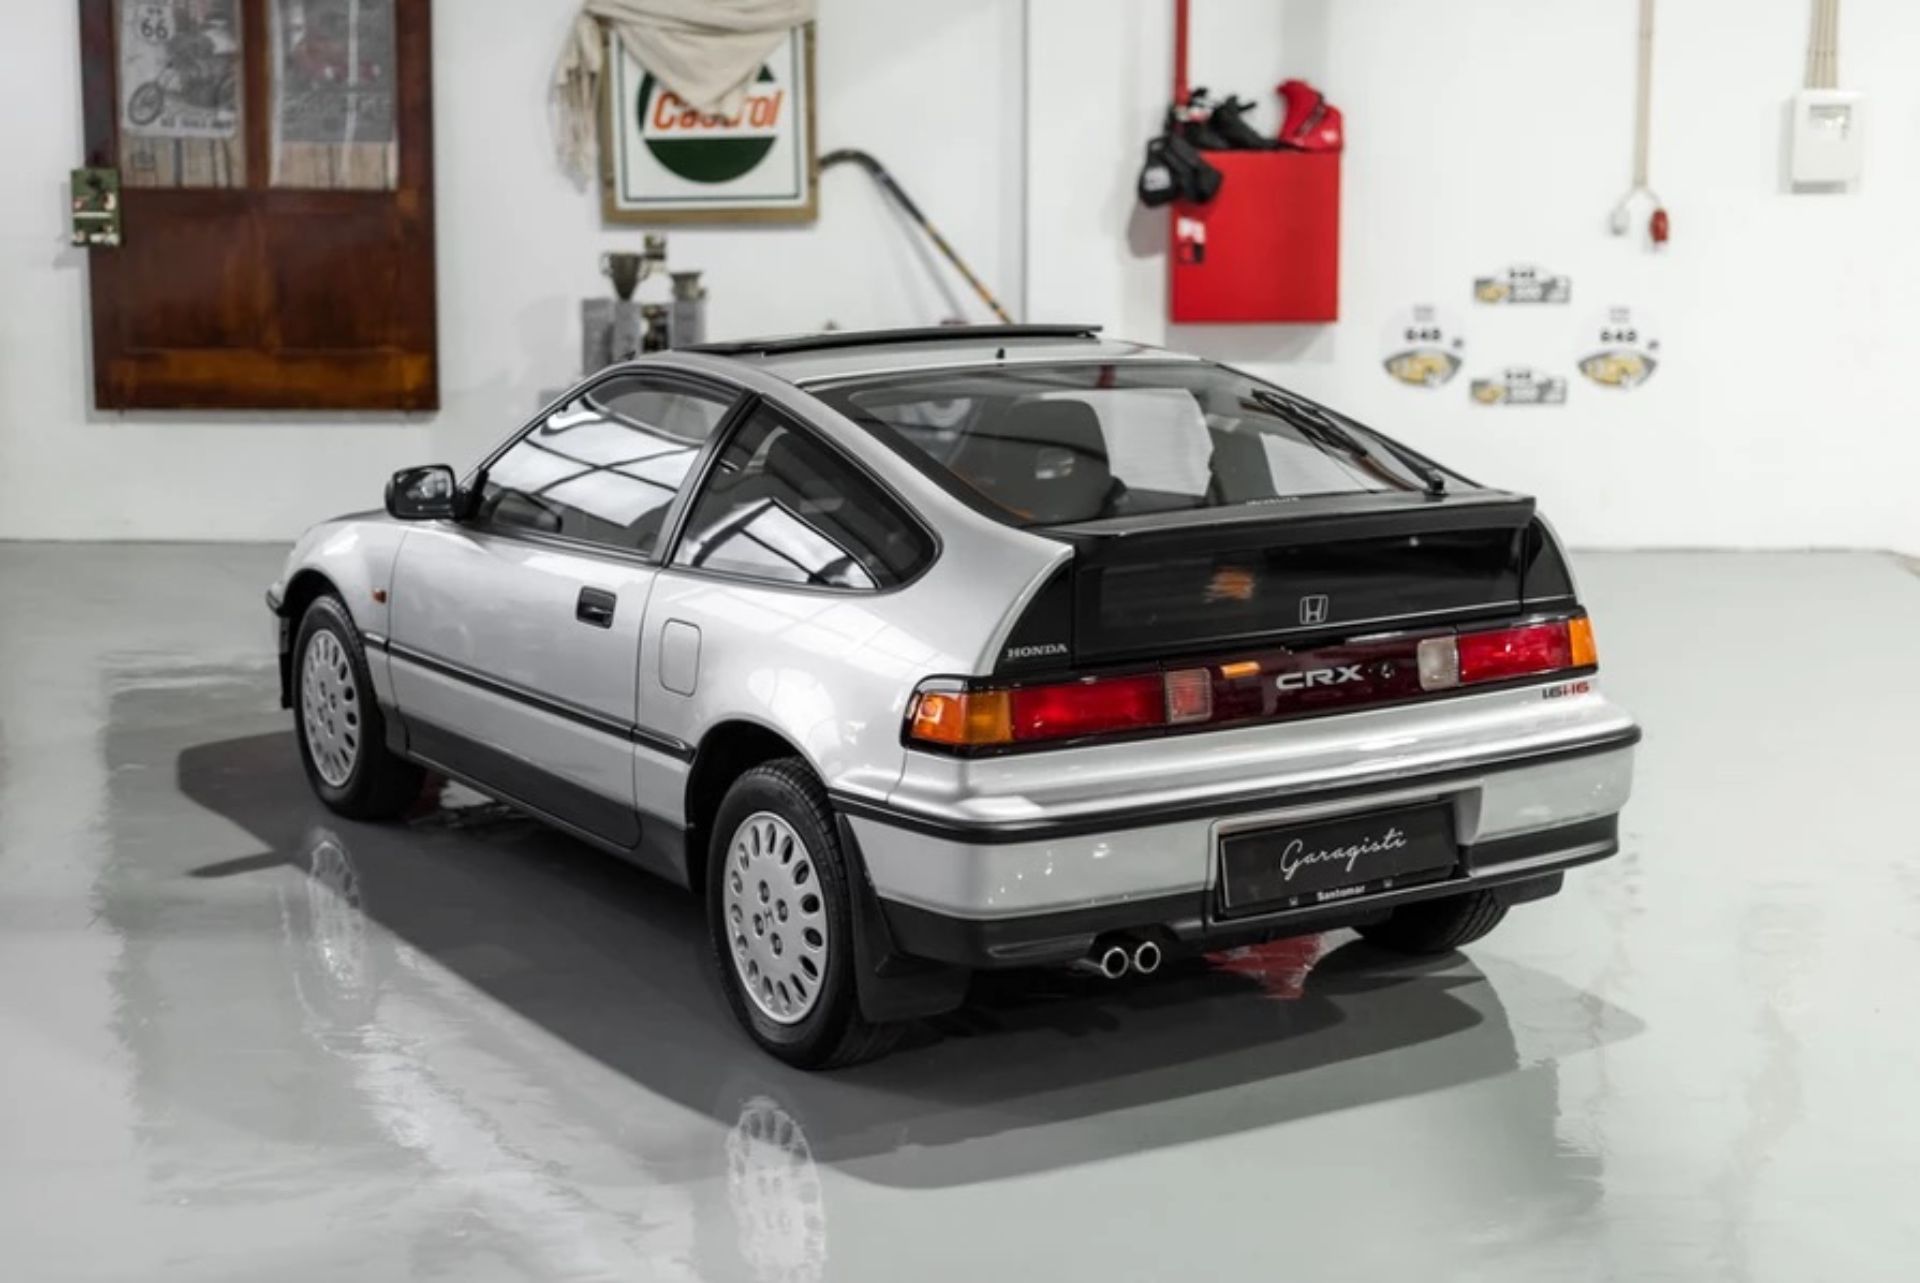 Inspiratie Een zin Assert This Practically New 1990 Honda CRX Could Be The Lowest-Mileage Example In  The World | Carscoops